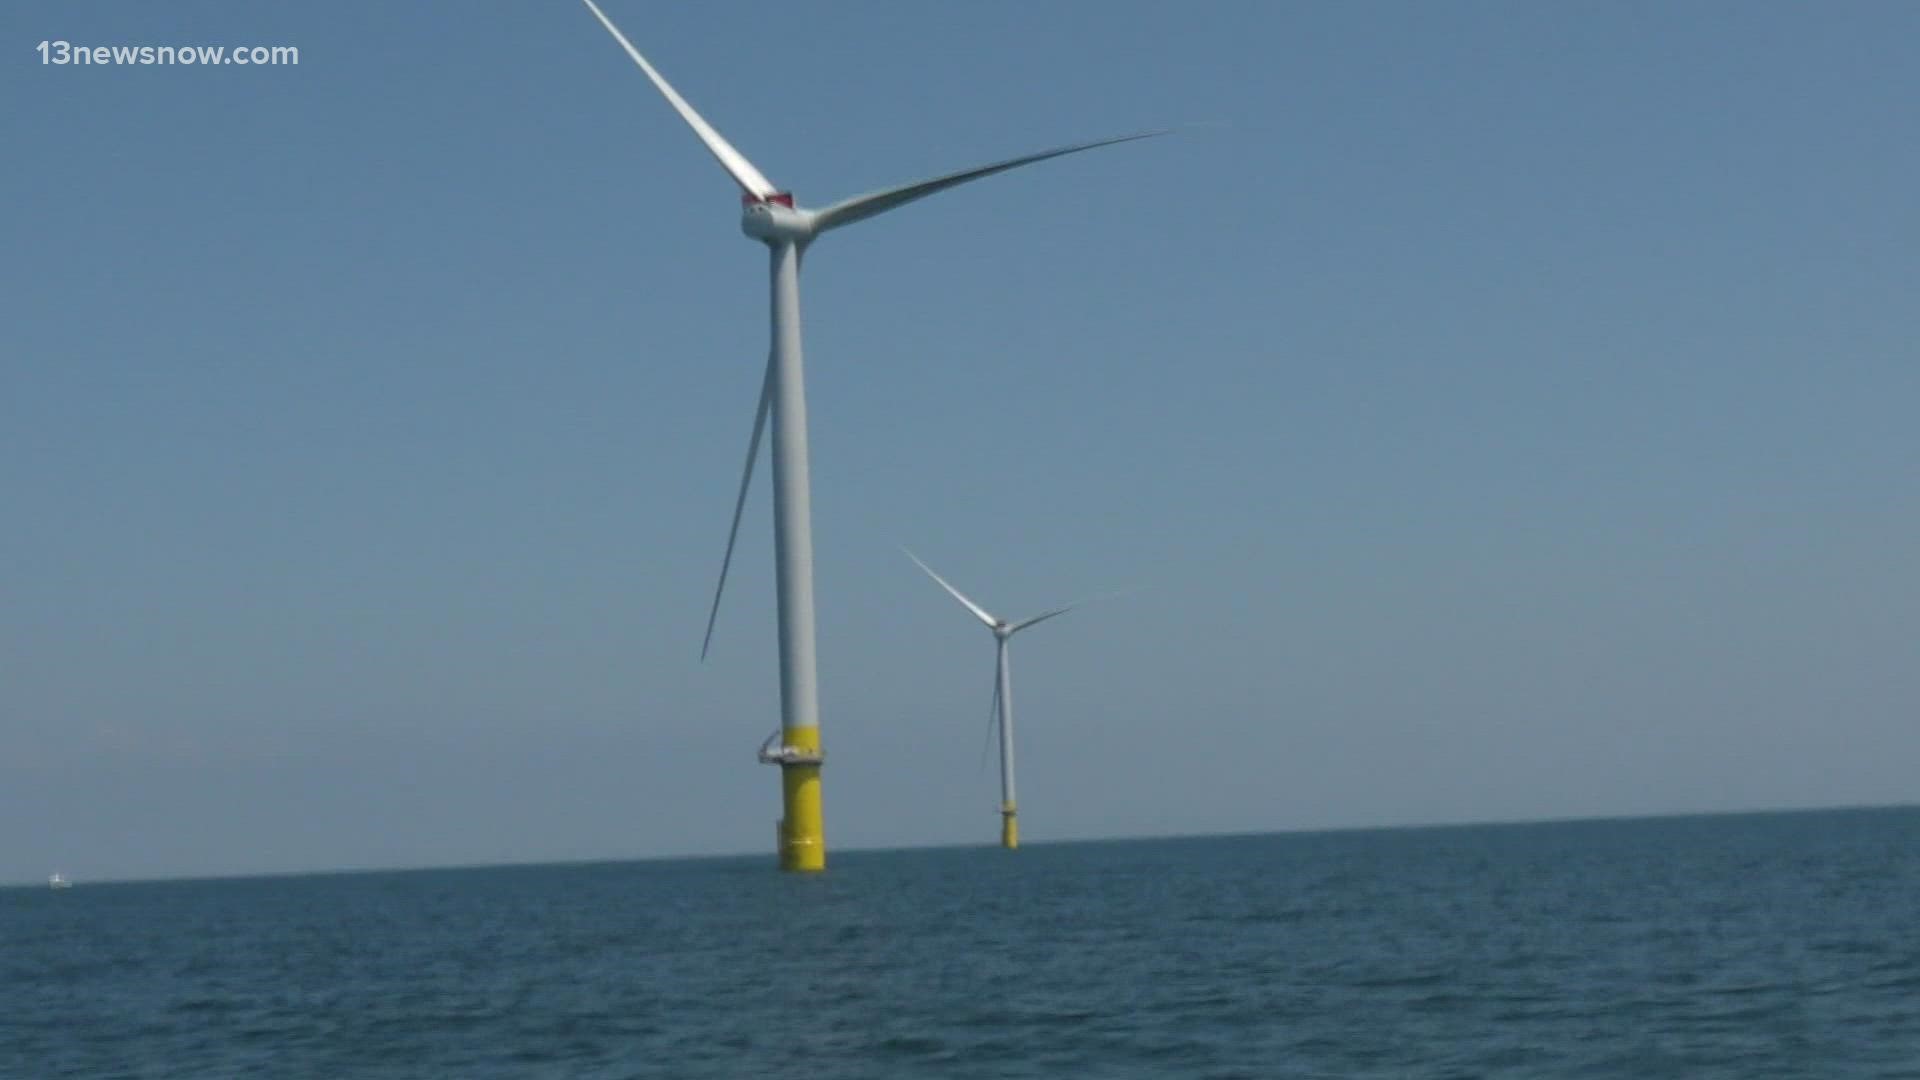 The Port of Virginia is going to lease 72 acres for Dominion Energy to use for producing wind turbines.